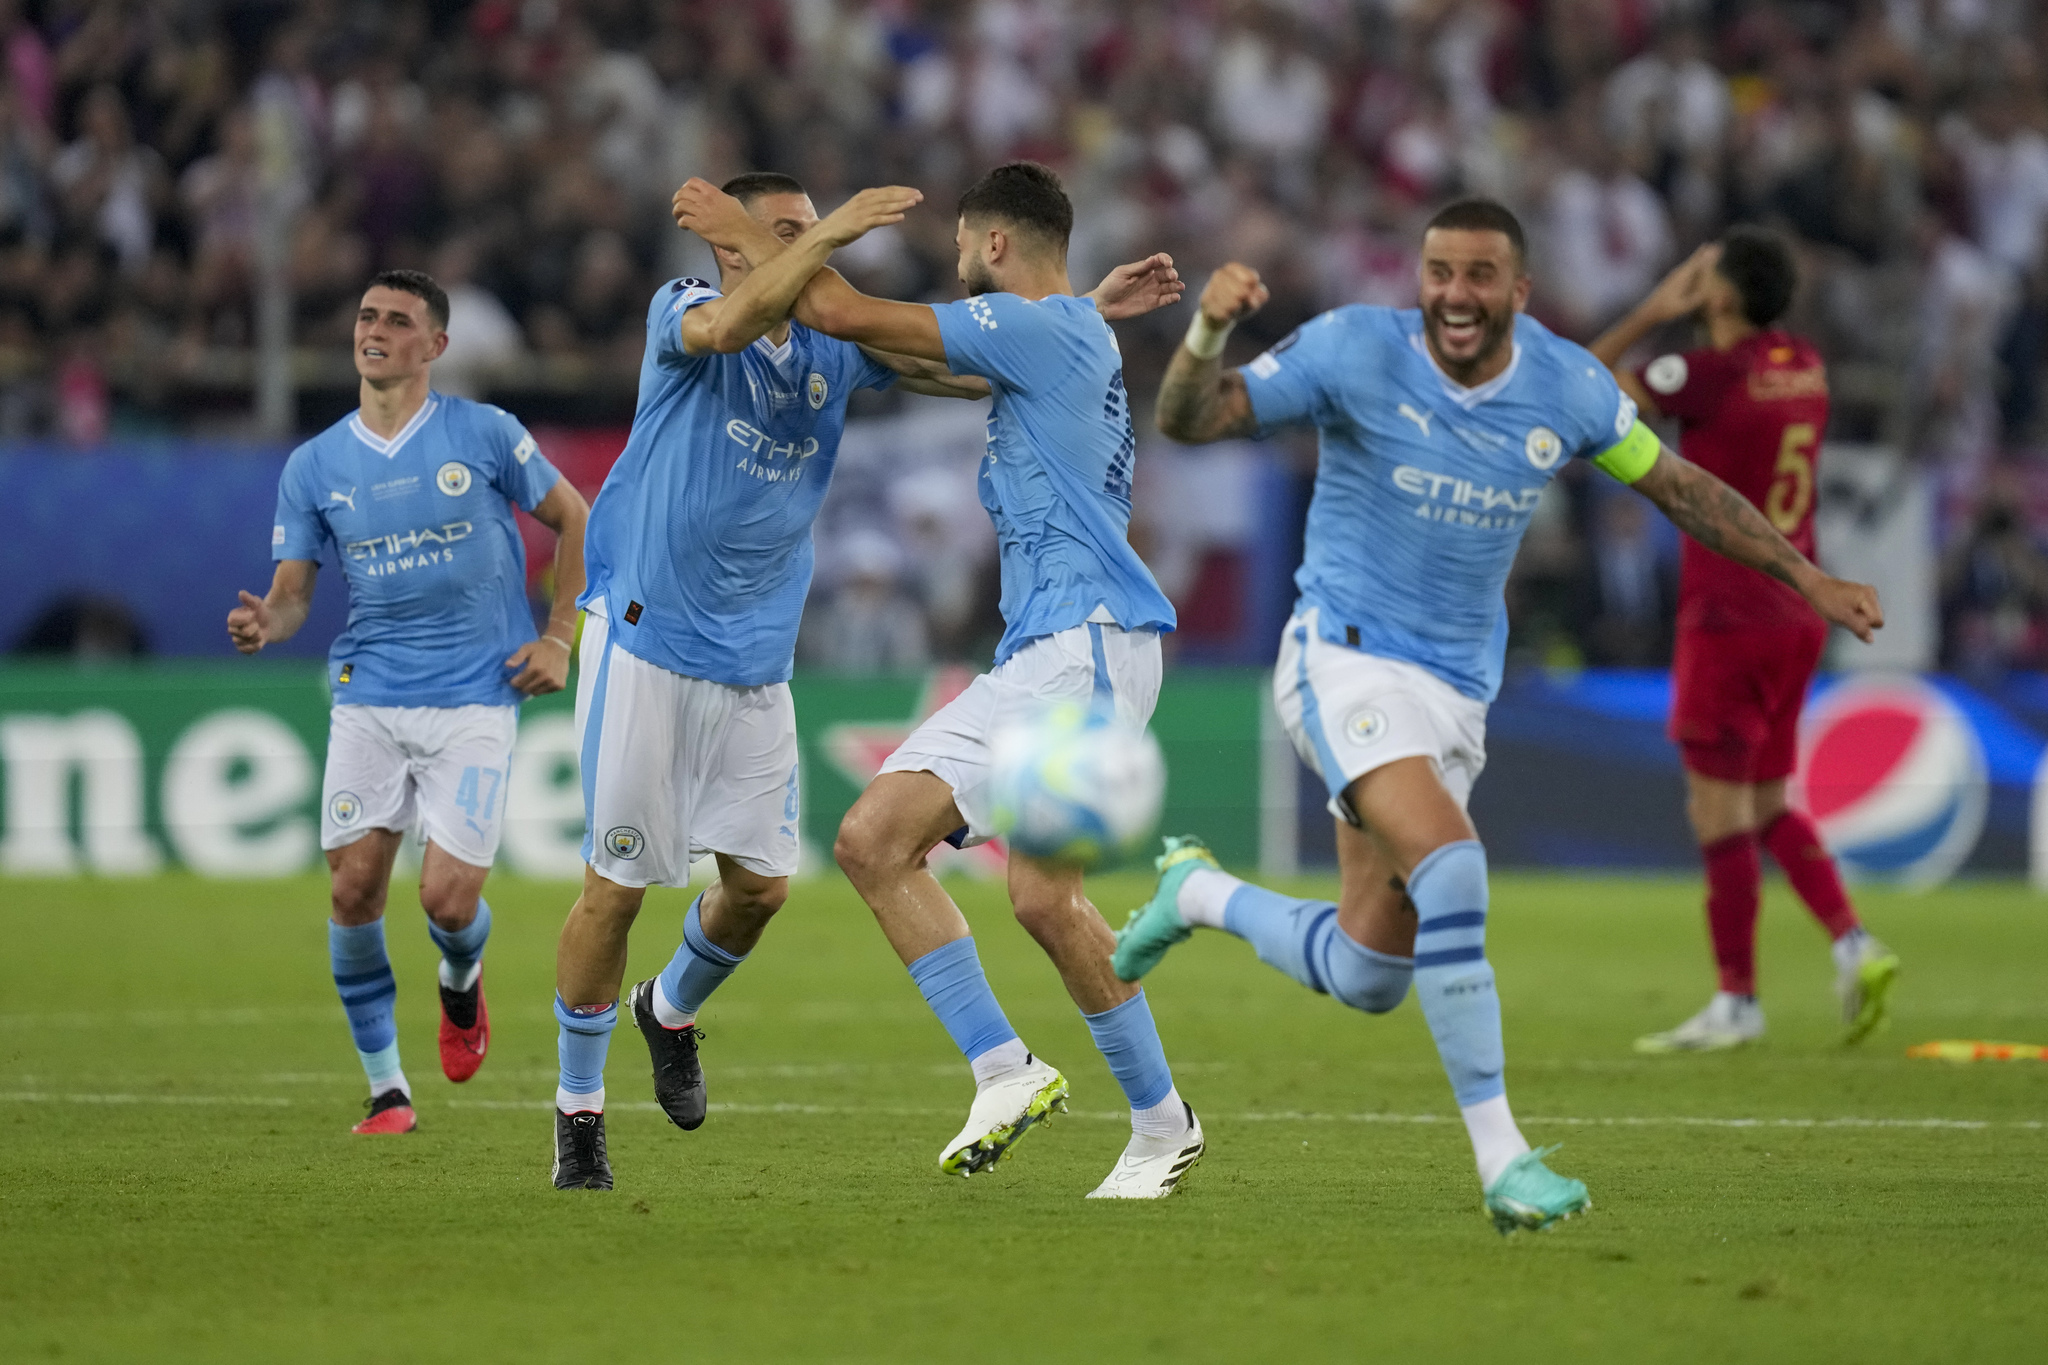 Manchester City players celebrate winning the Super Cup